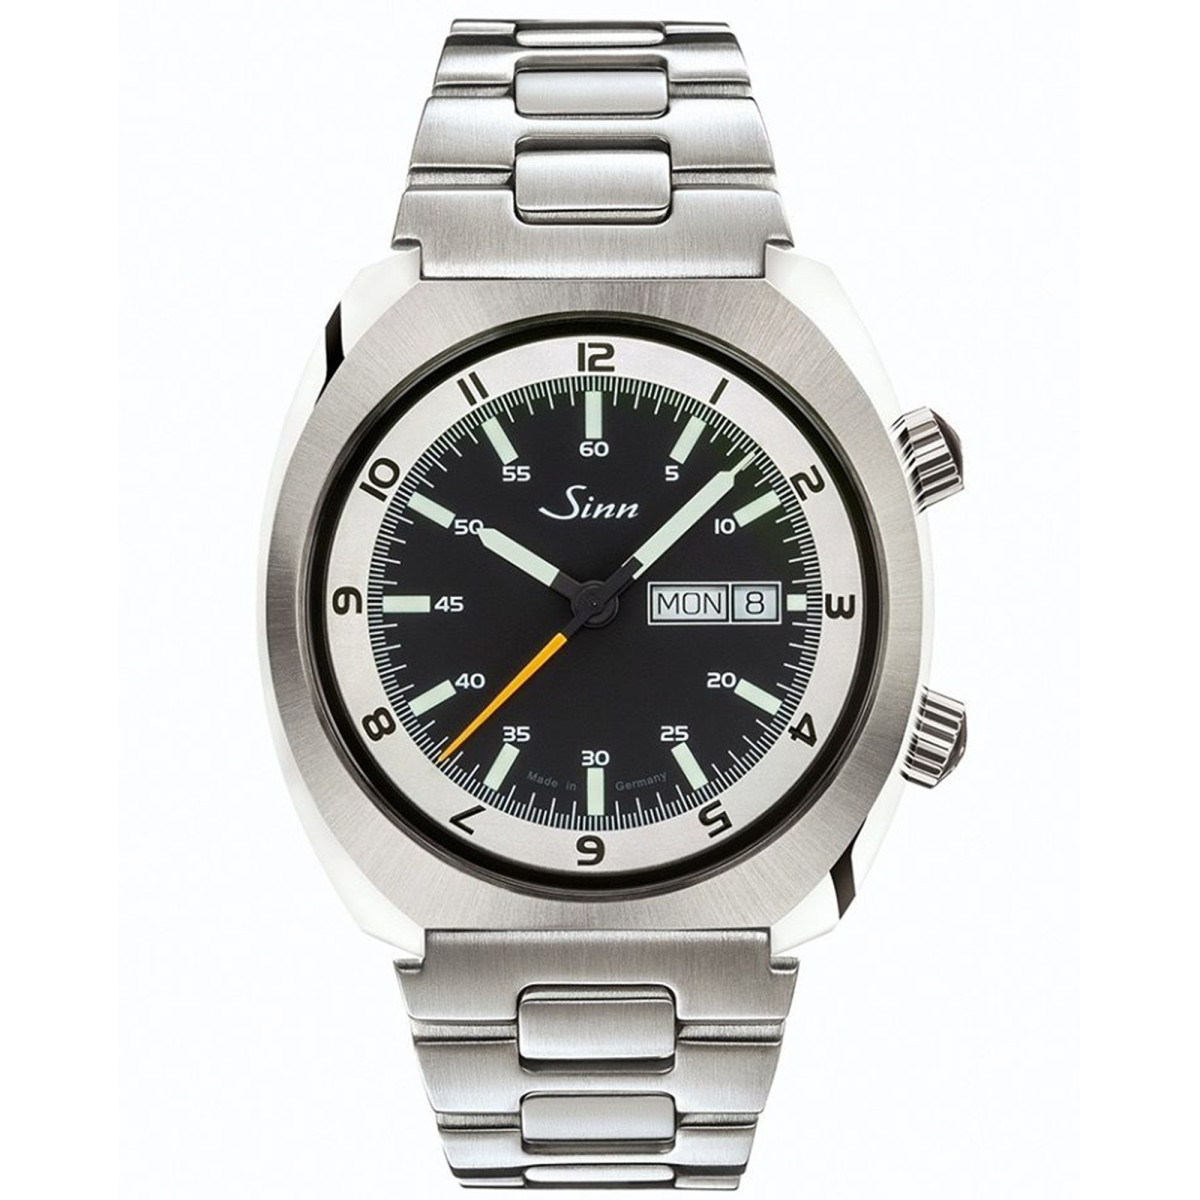 Sinn releases an exclusive watch for Chronos Magazine - Acquire